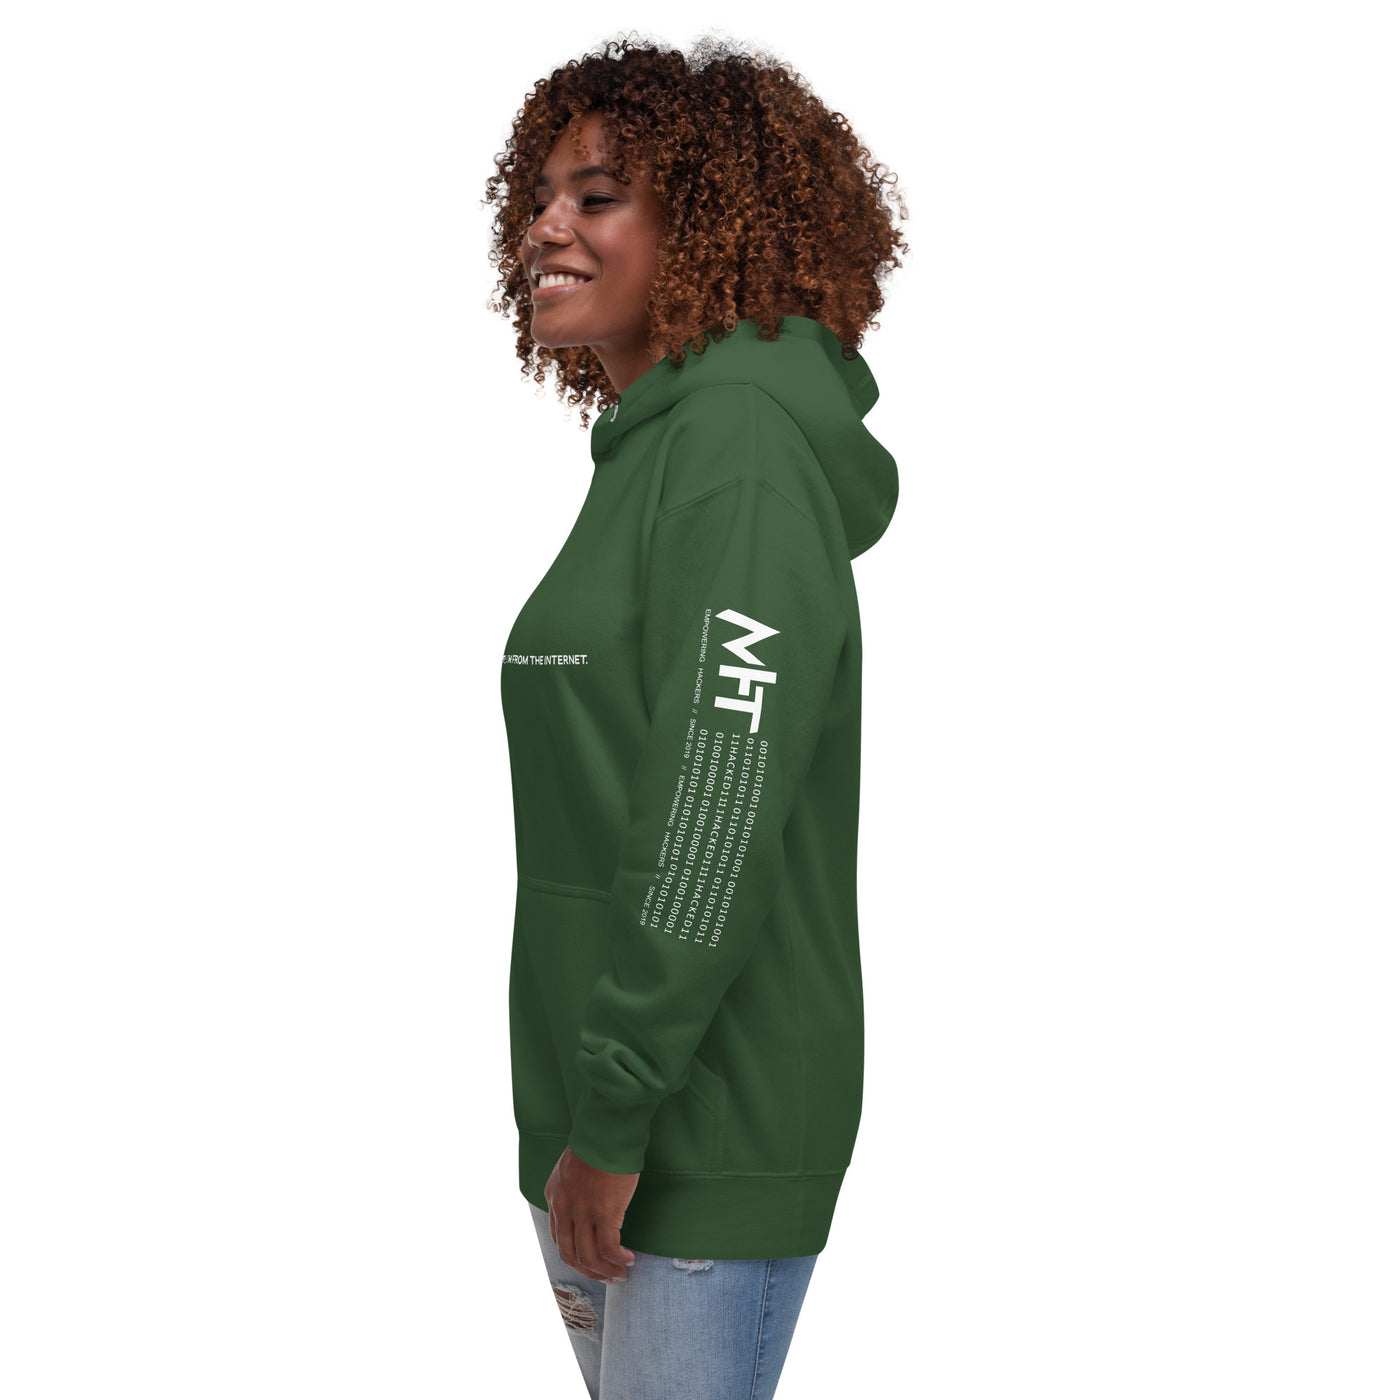 Don't worry I am from the Internet V1 - Unisex Hoodie